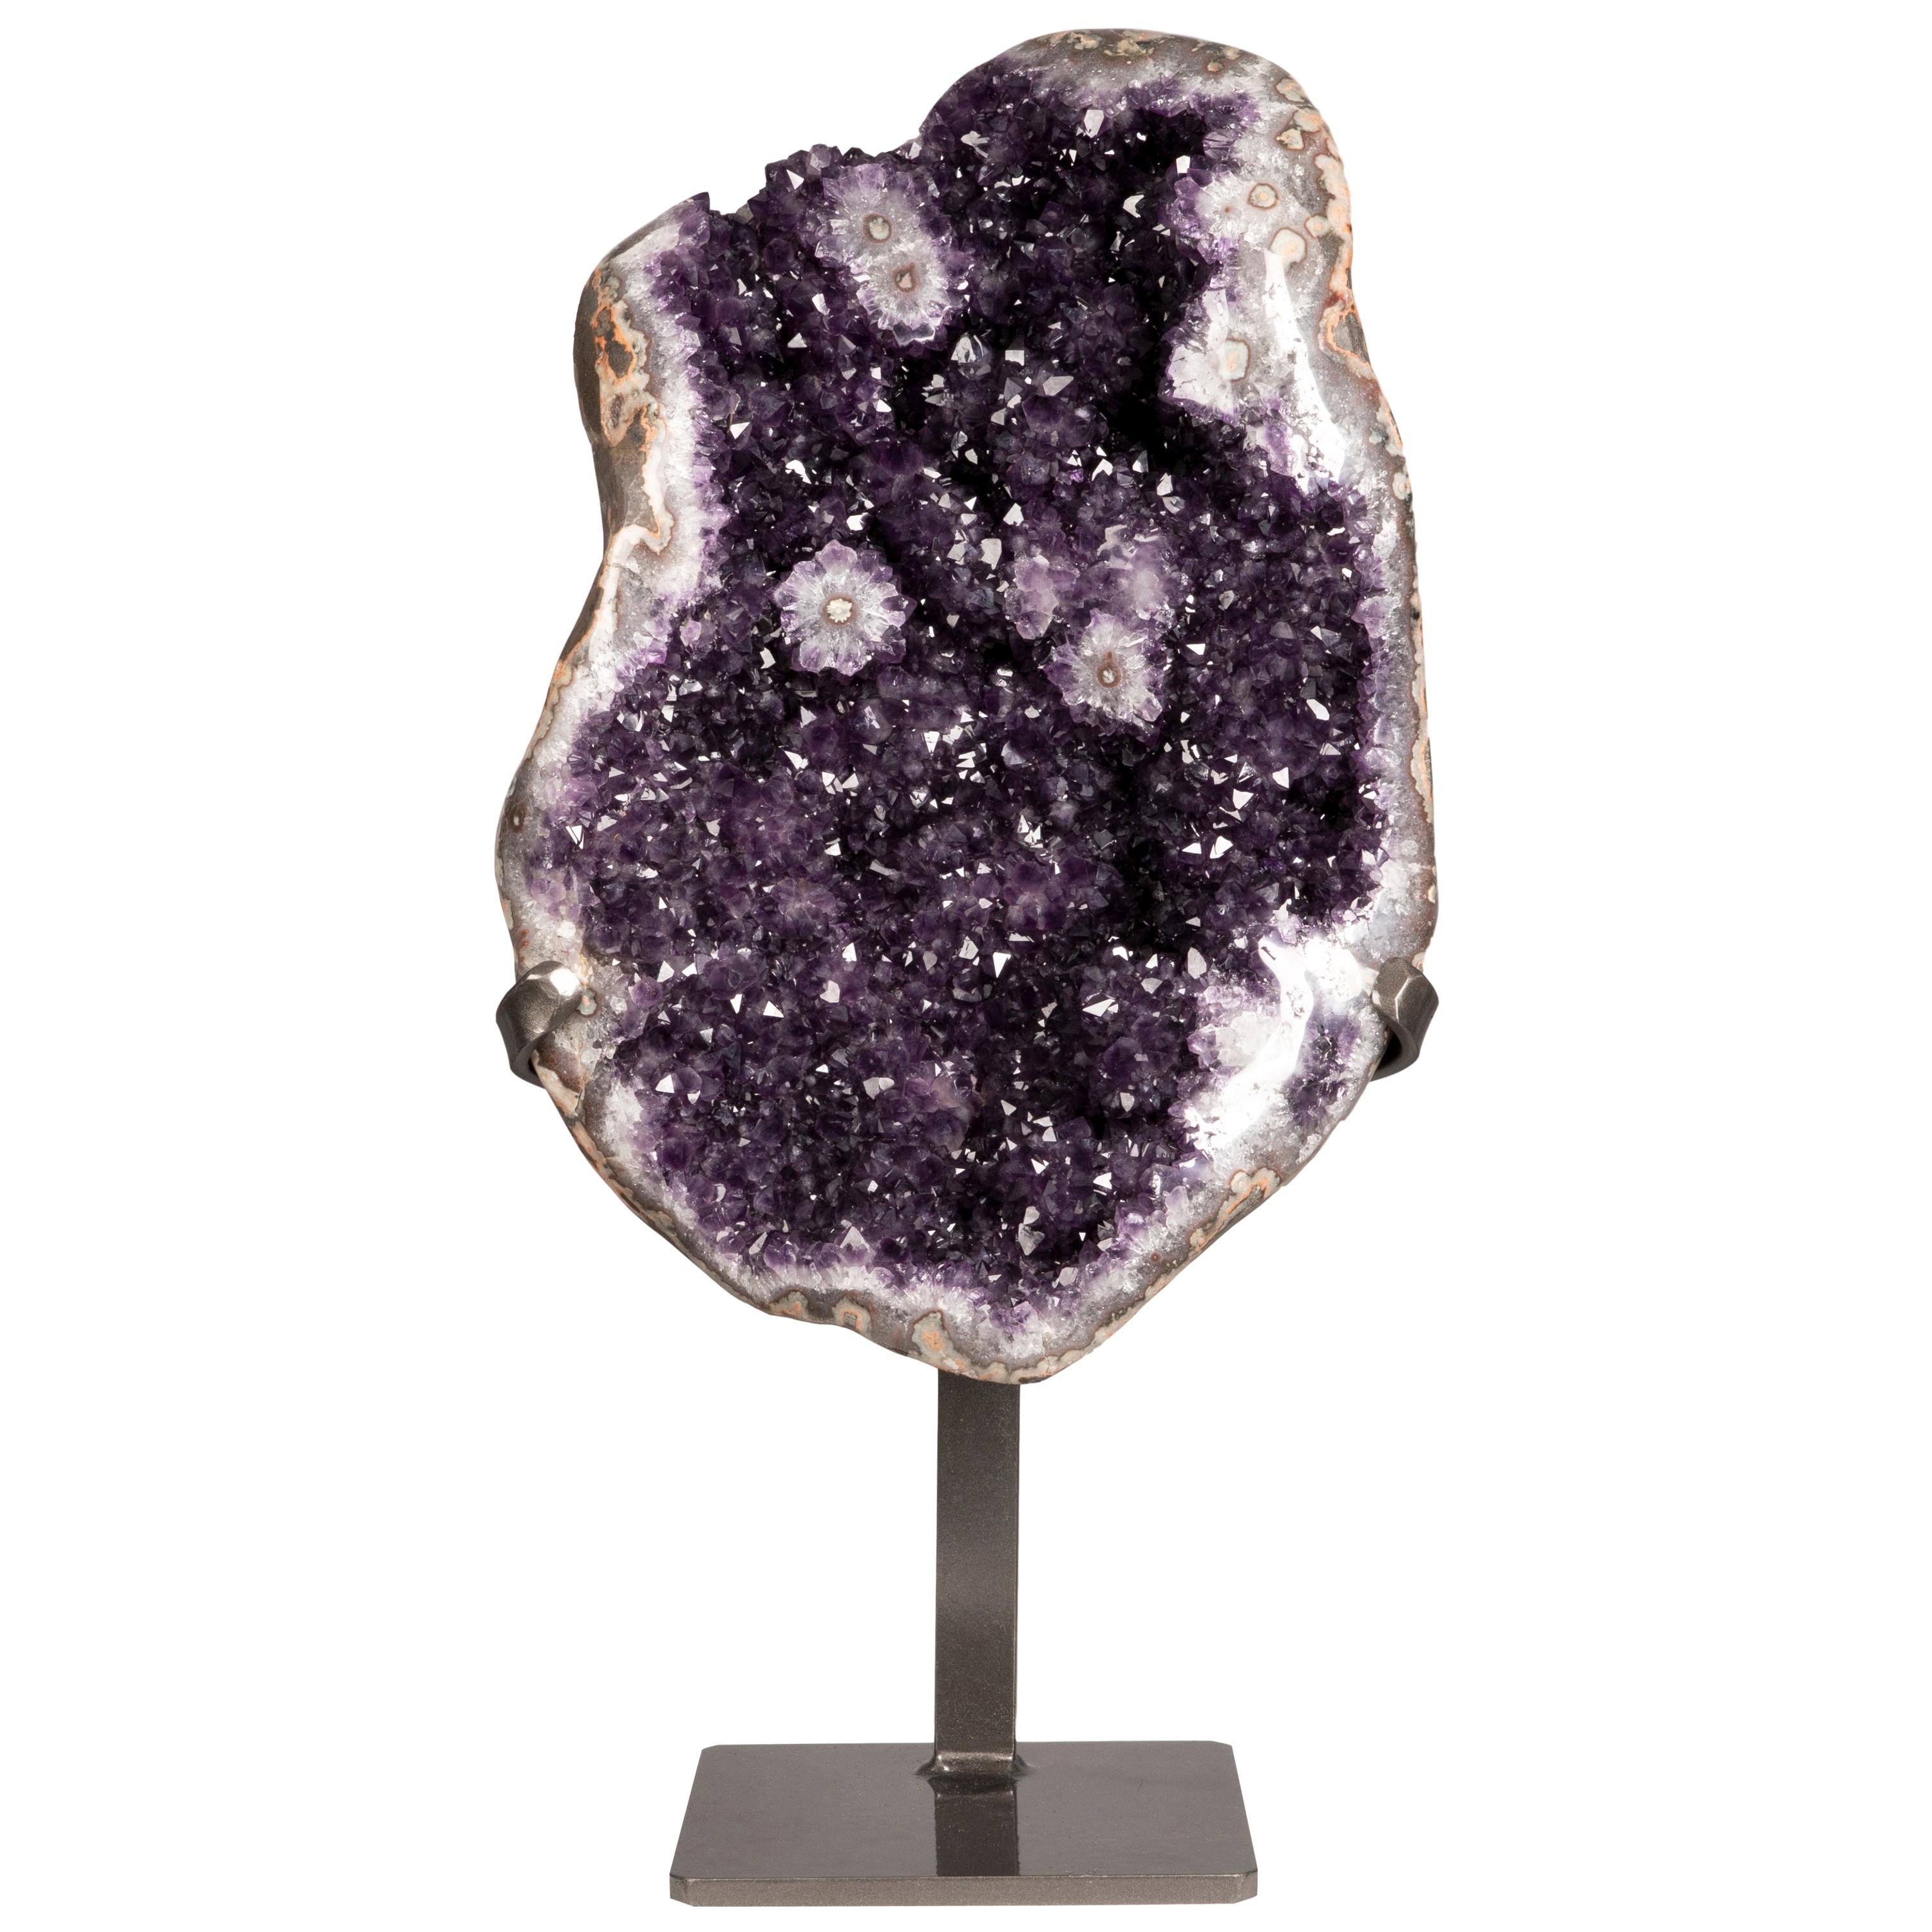 Large Amethyst Cluster with Cut Stalactites on Metal Stand